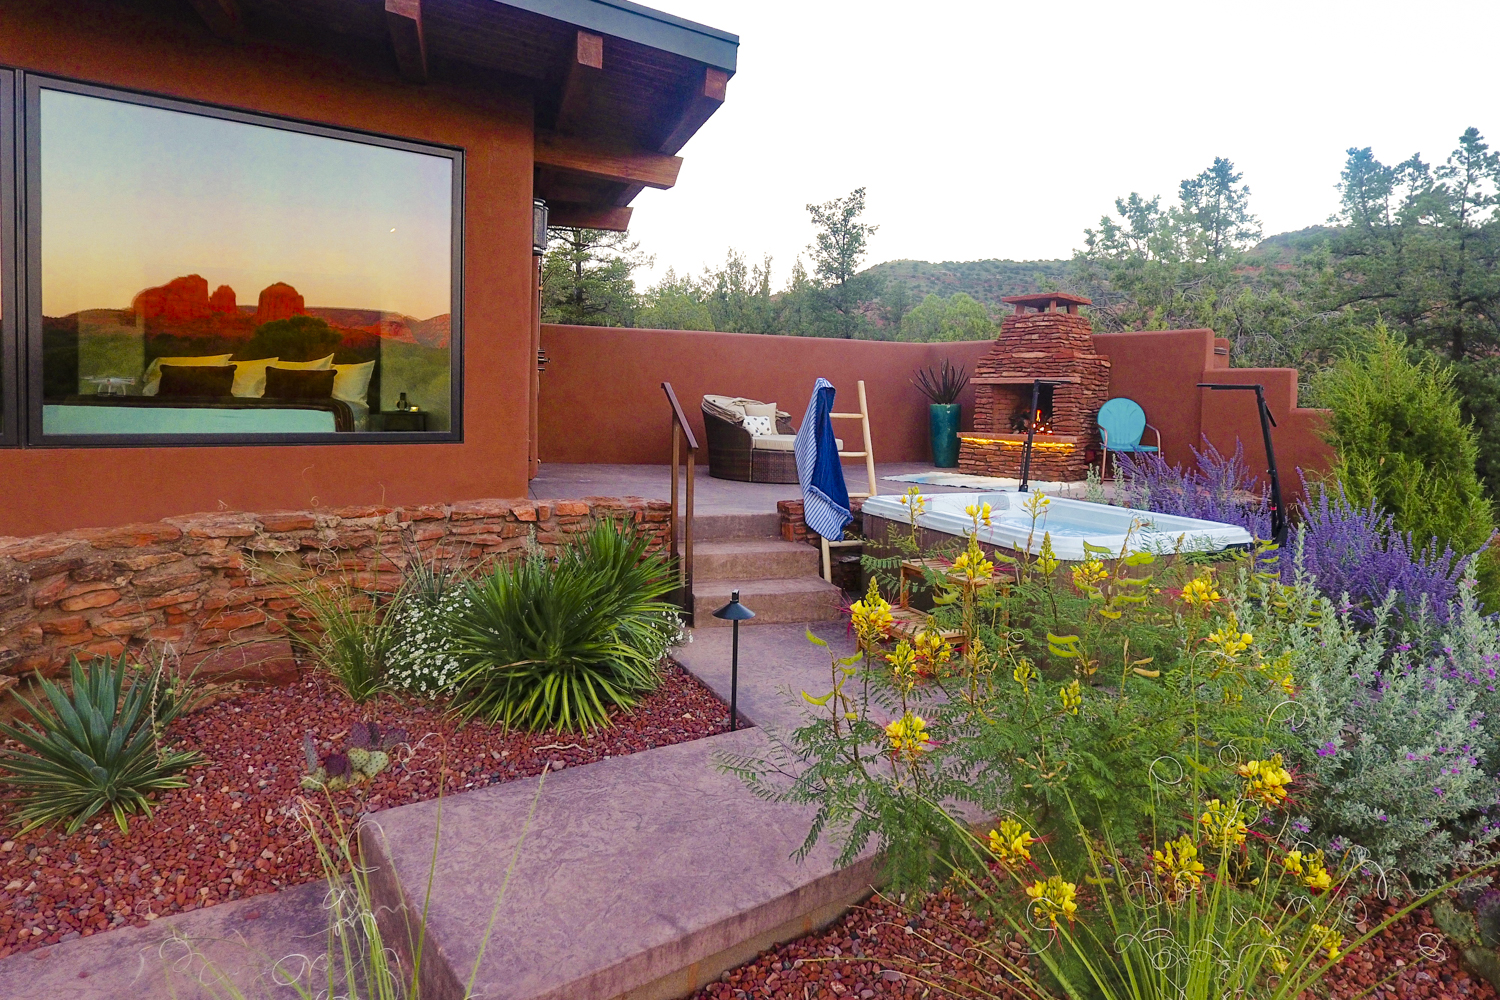 this luxury sedona vacation rental is like a personal resort for two dcim100mediadji 0083 jpg